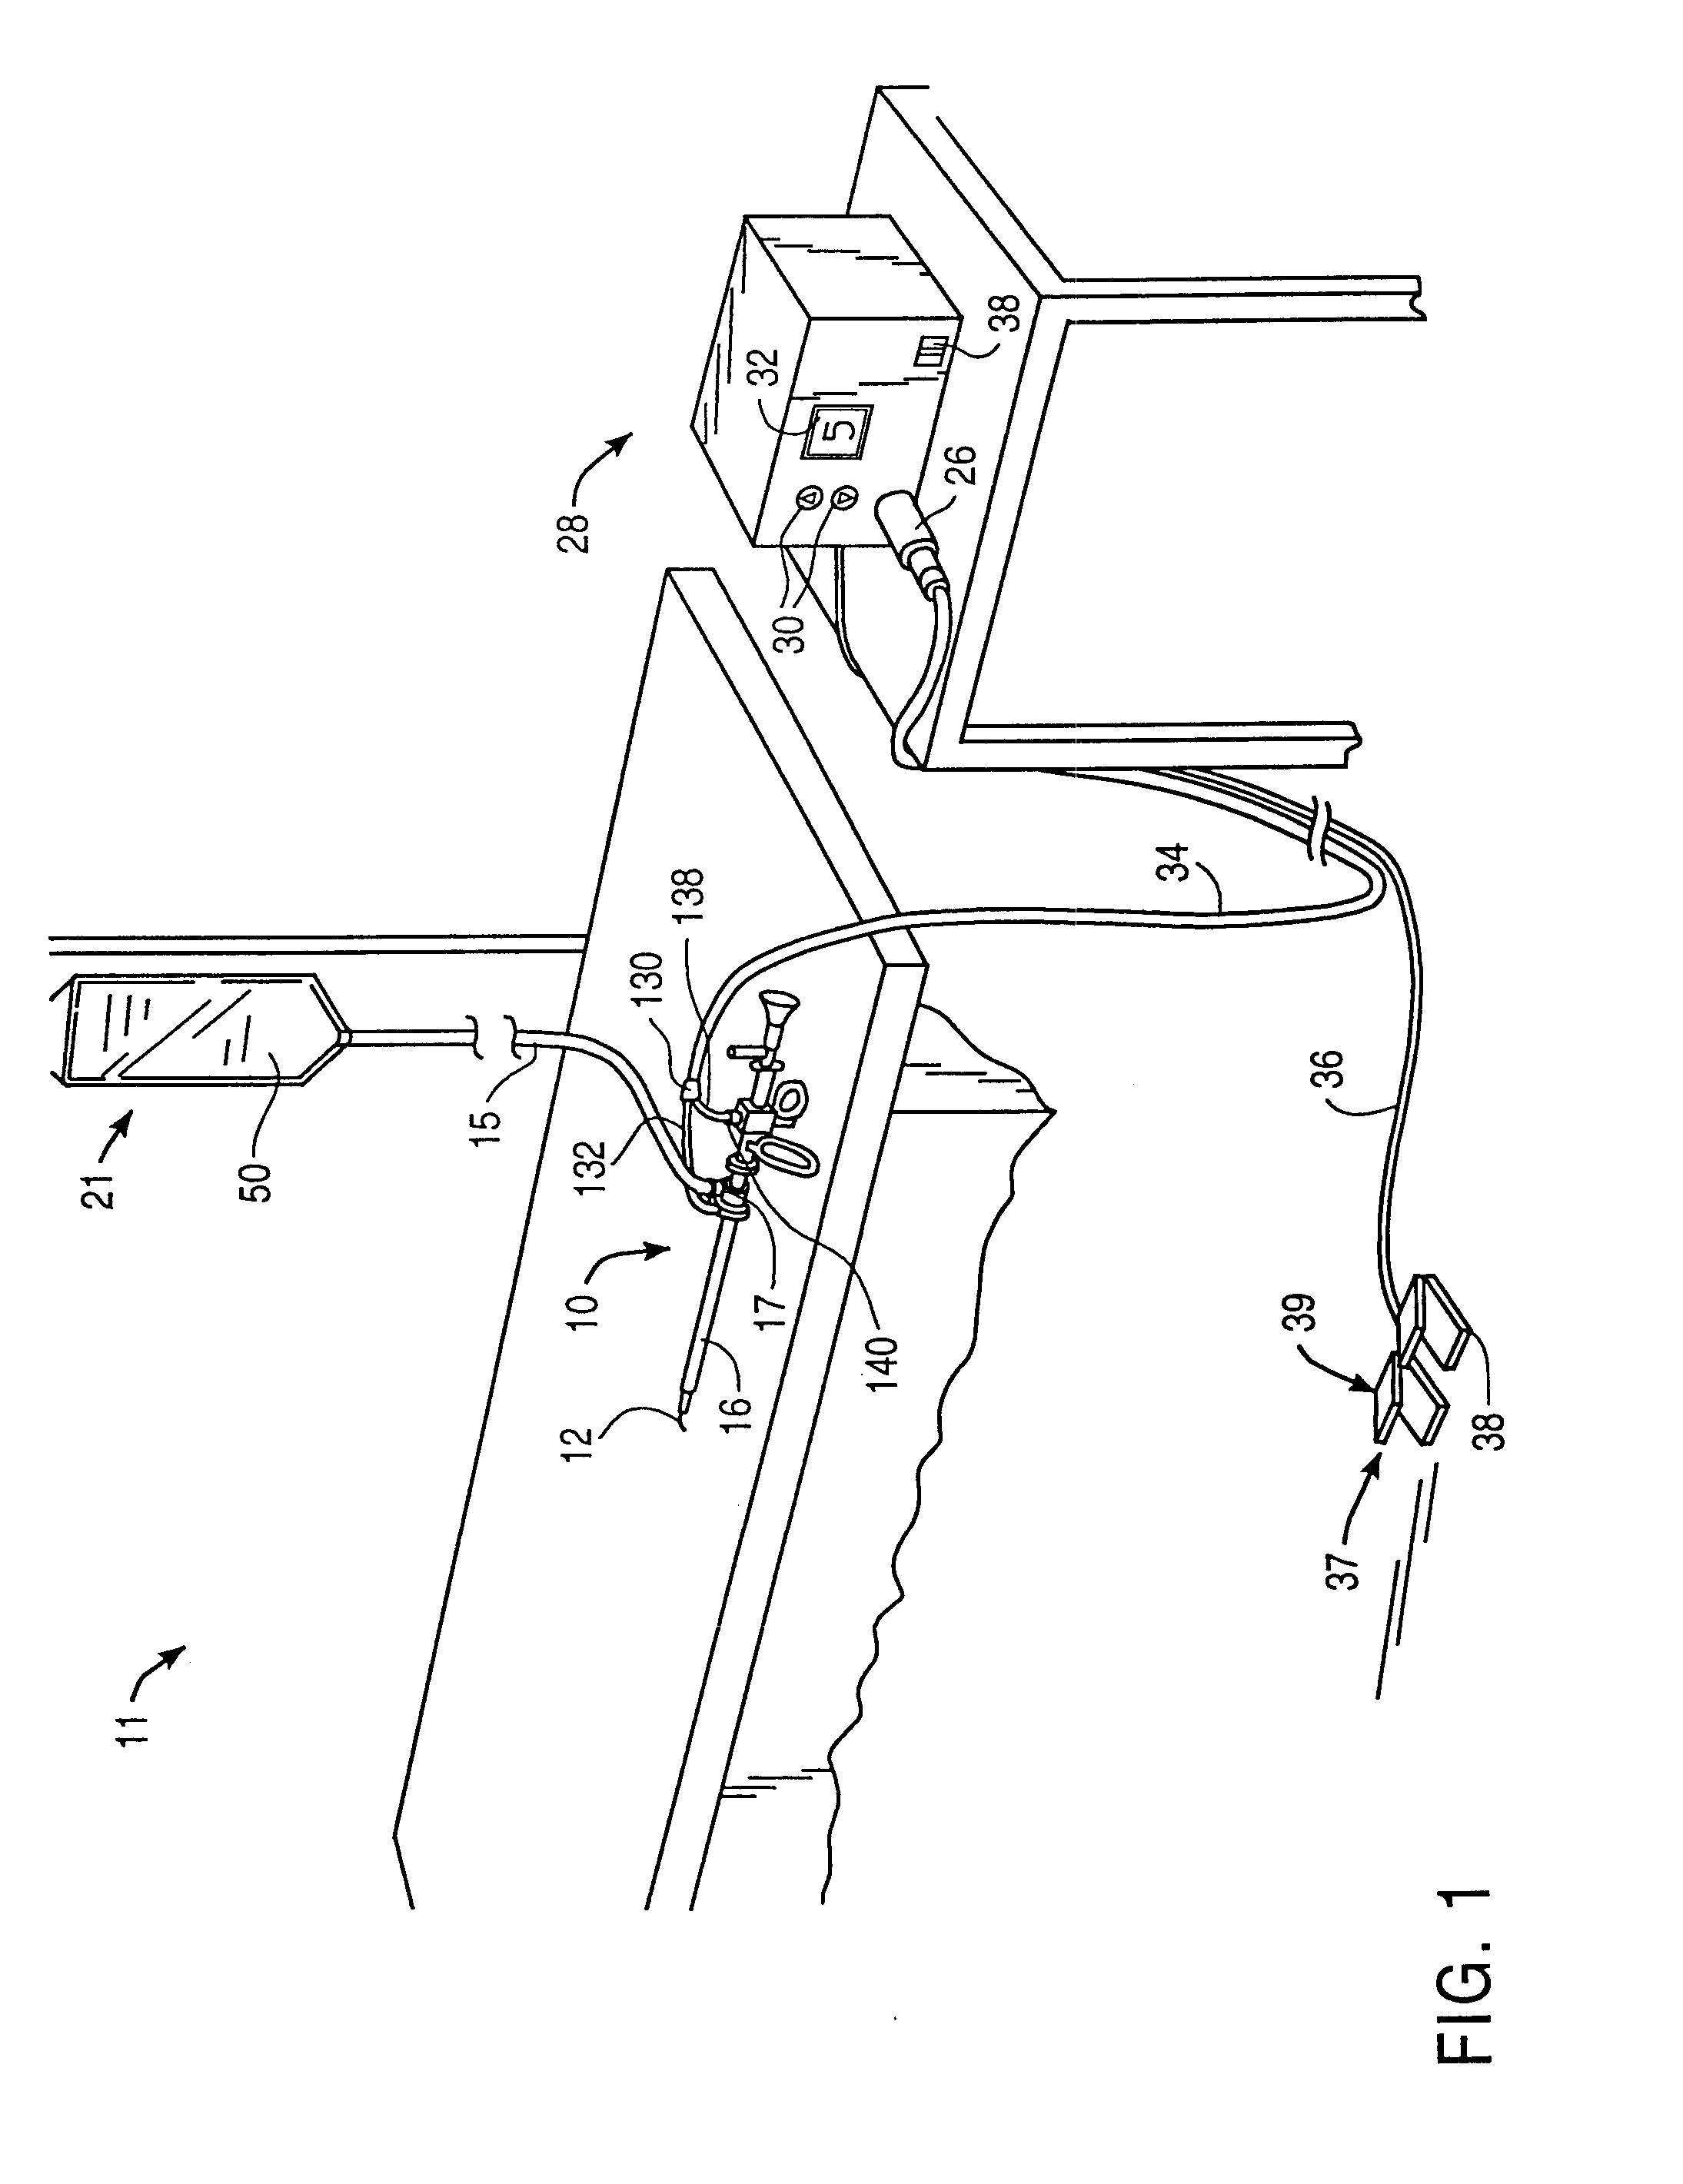 Apparatus and methods for electrosurgical ablation and resection of target tissue